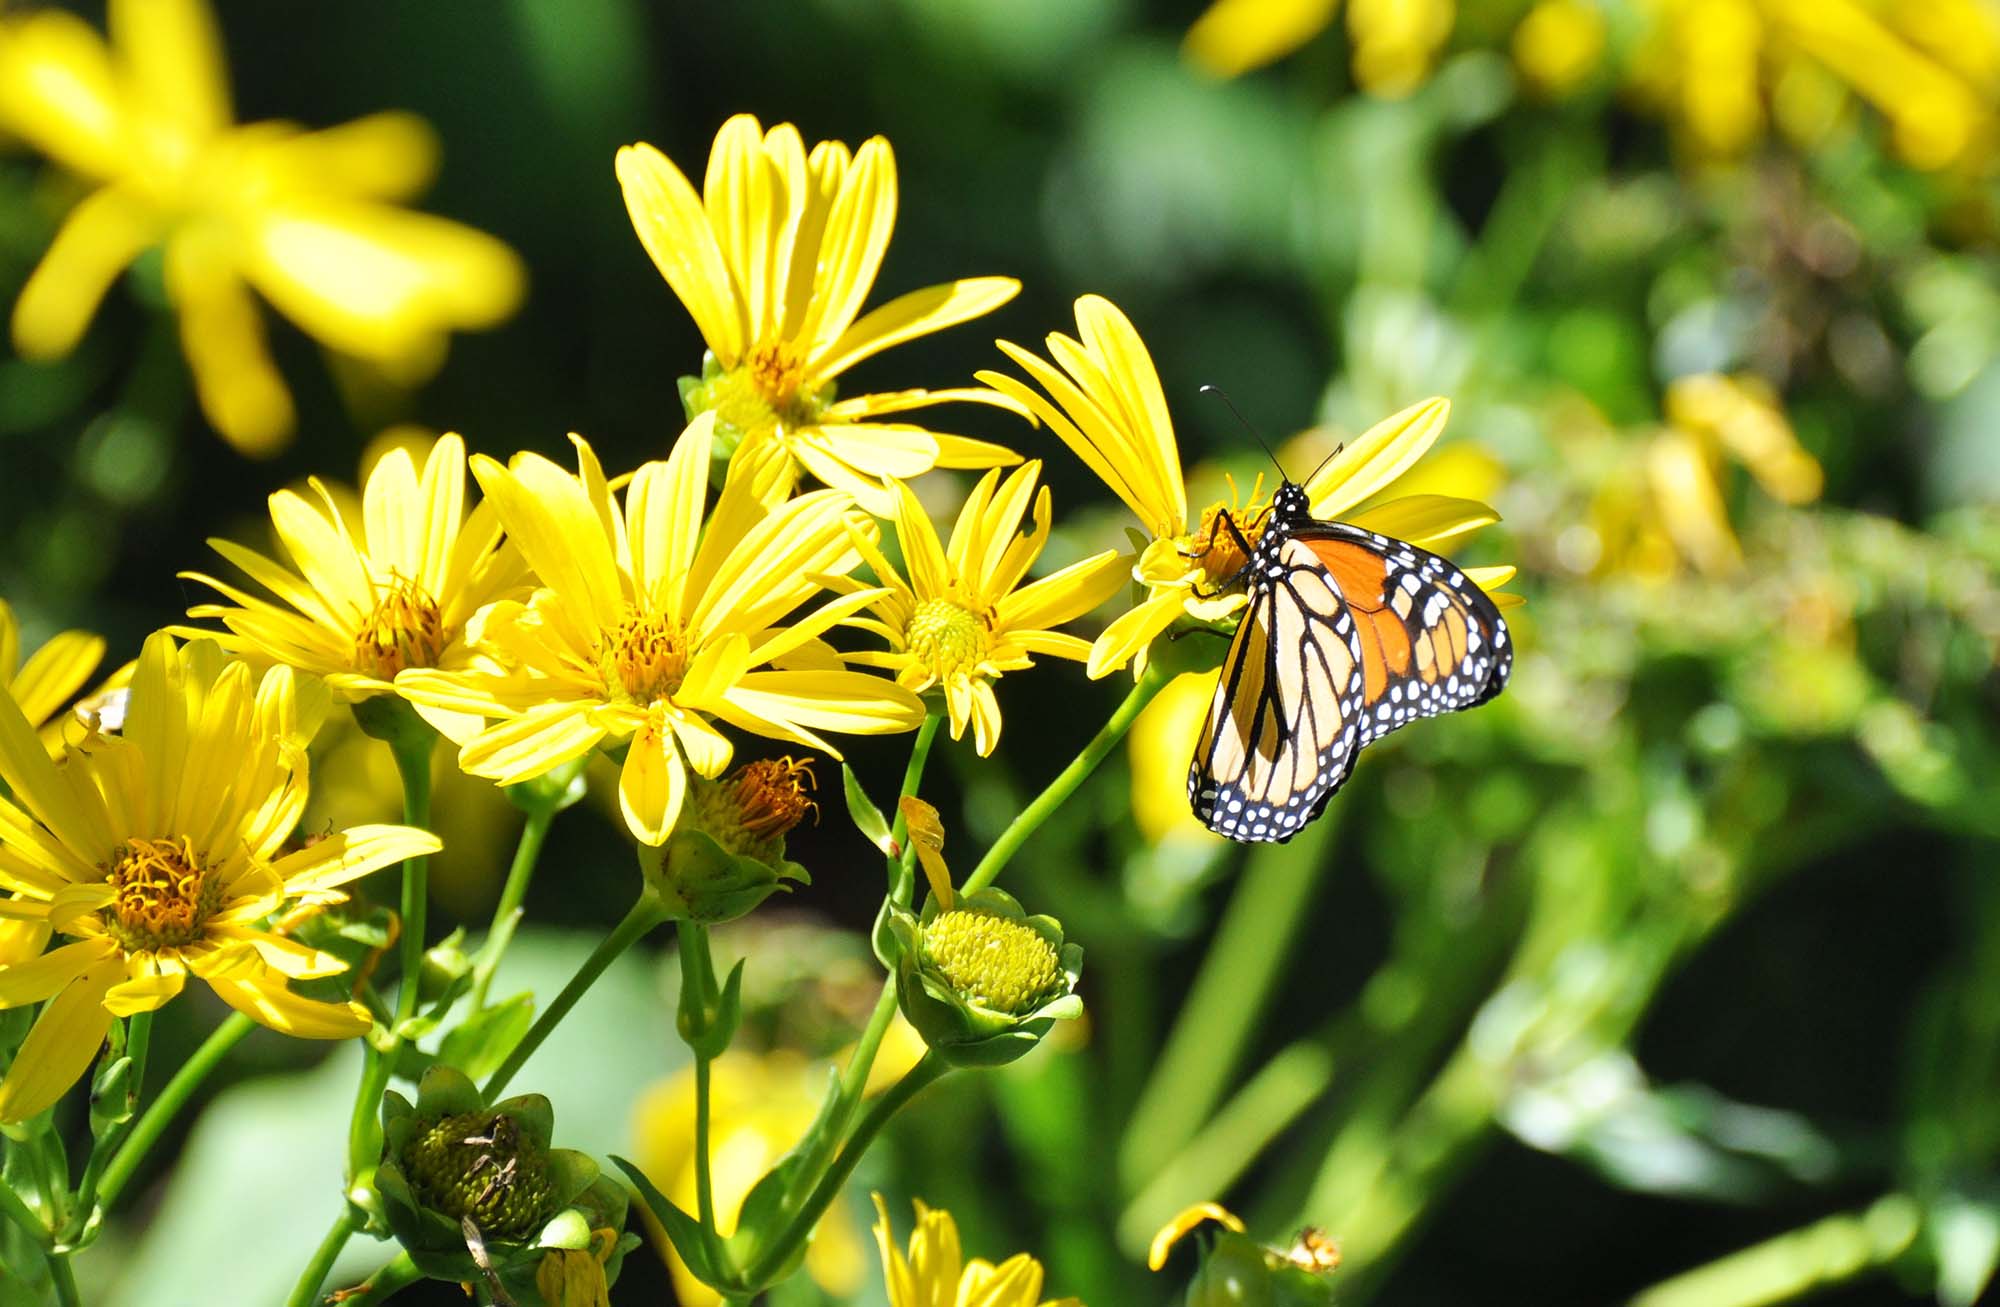 An orange and black butterfly feeding on bright yellow flowers